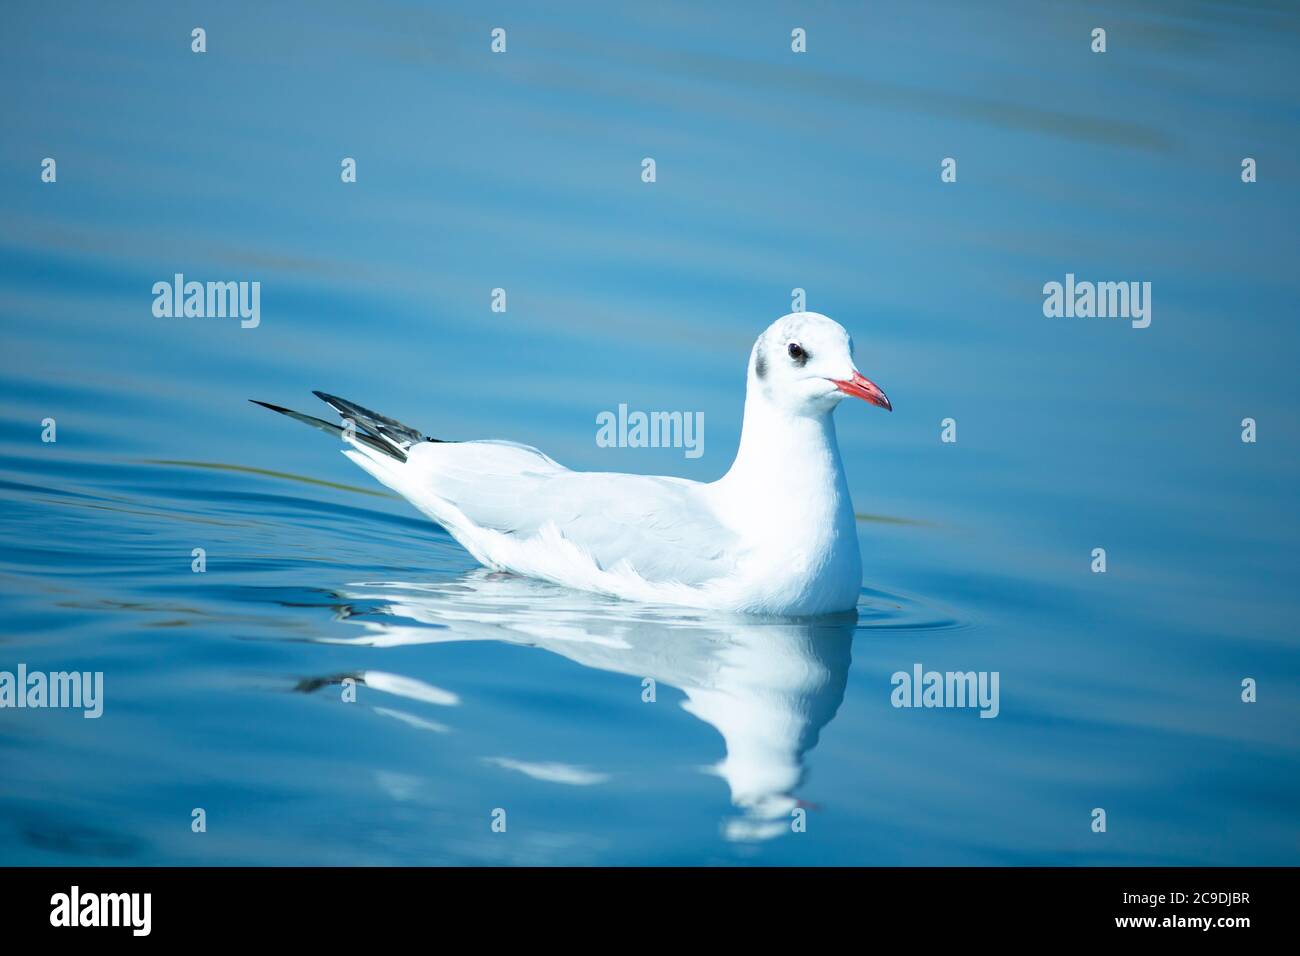 Seagull Swimming on the Water Stock Photo